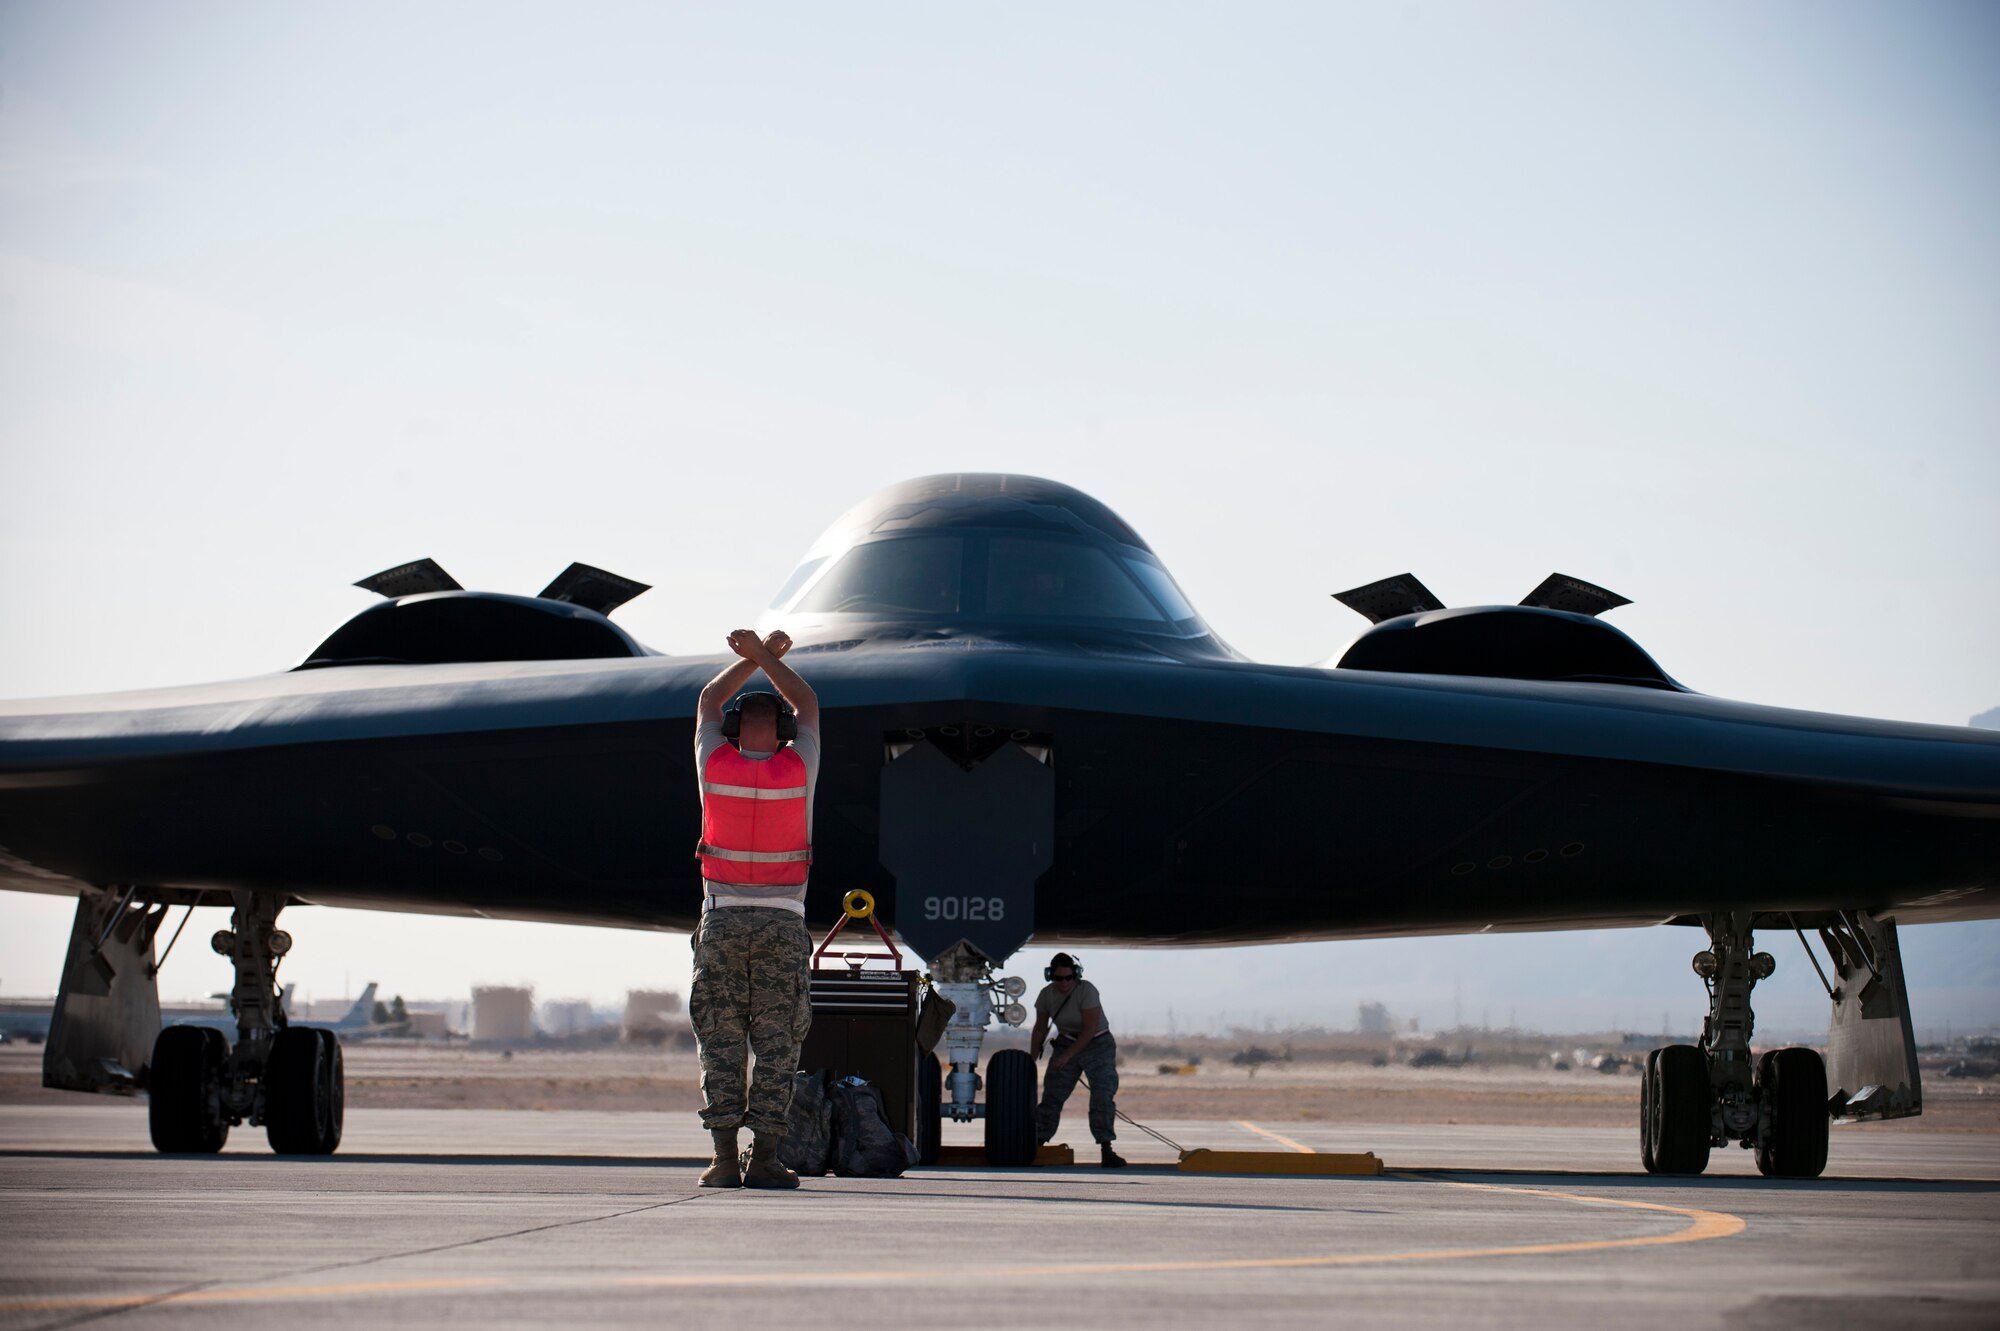 Staff Sgt. Scott Schroer (left), and Tech. Sgt. Ronda Bollinger, crew chiefs assigned to the 131st Bomb Wing, Whiteman Air Force Base, Mo. marshal a B-2 Spirit assigned to the 509th Bomb Wing from Whiteman AFB, June 23, 2014, at Nellis AFB, Nev. The aircraft maintainers from the 131st Bomb Wing are all Air National Guard members. The guard units, along with active duty units, are participating in total force integration with the U.S. Air Force Weapons School. (U.S. Air Force photo by Airman 1st Class Thomas Spangler)